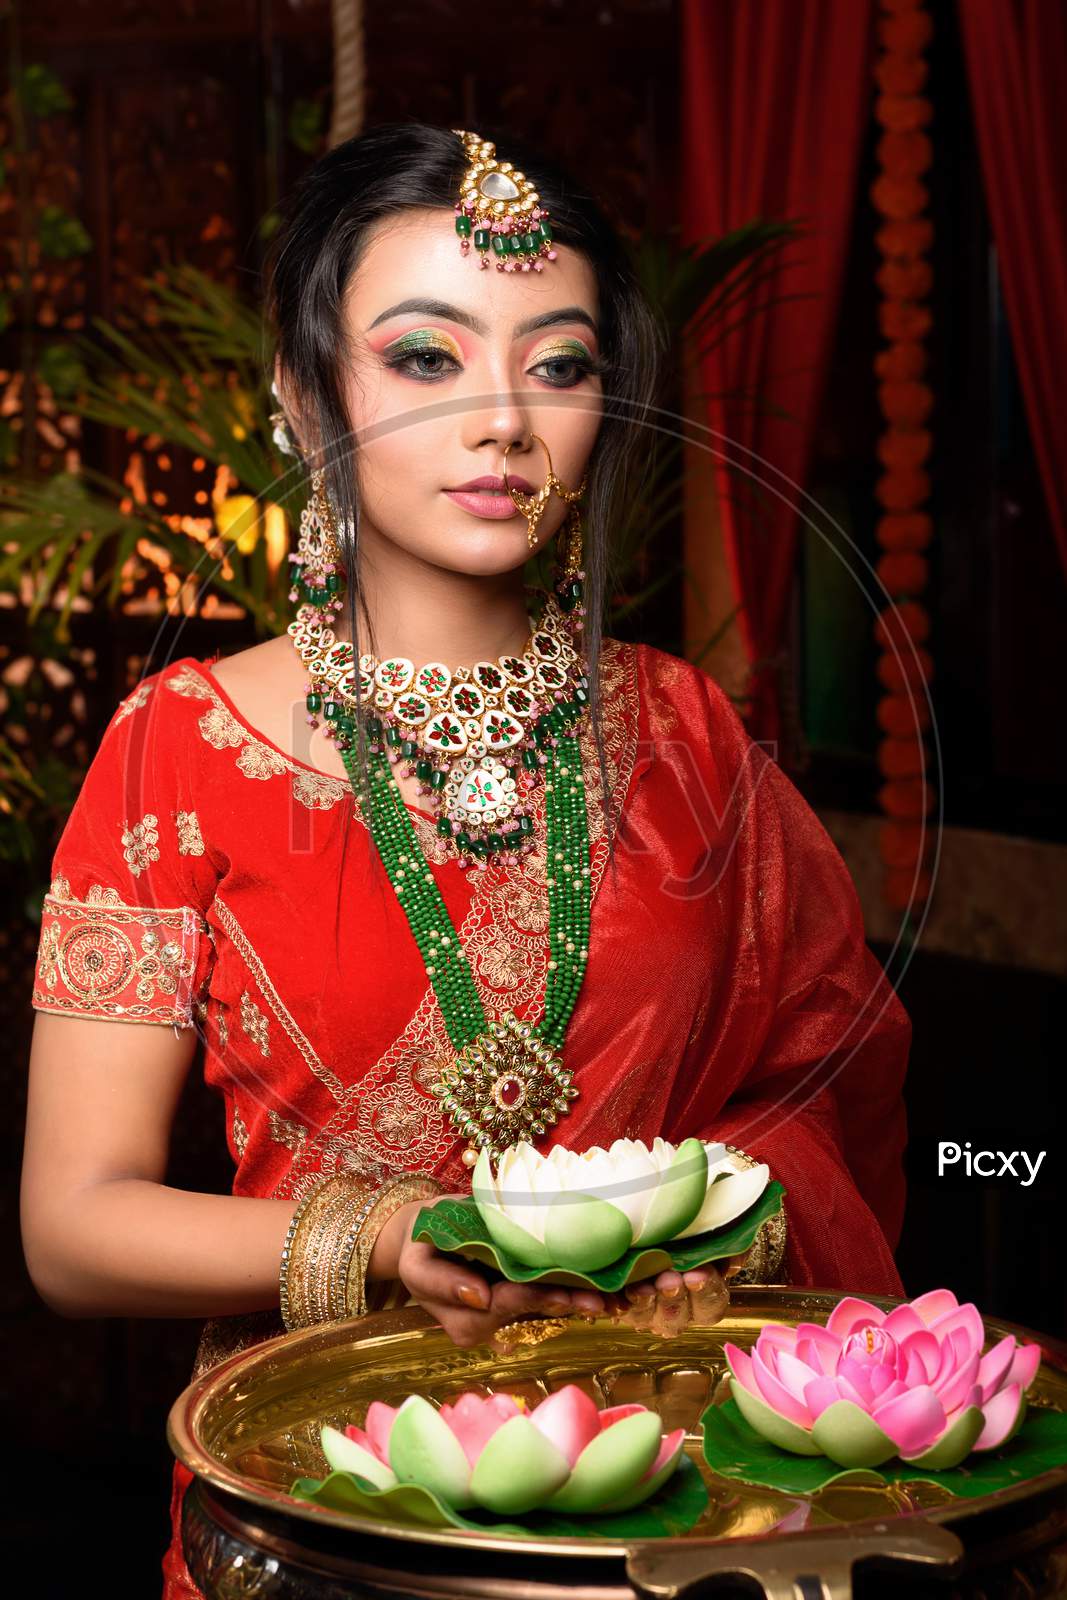 Portrait Of Very Beautiful Young Indian Bride In Luxurious Bridal Costume With Makeup And Heavy Jewellery Holding A Lotus In Studio Lighting Indoor. Lifestyle Wedding Fashion.